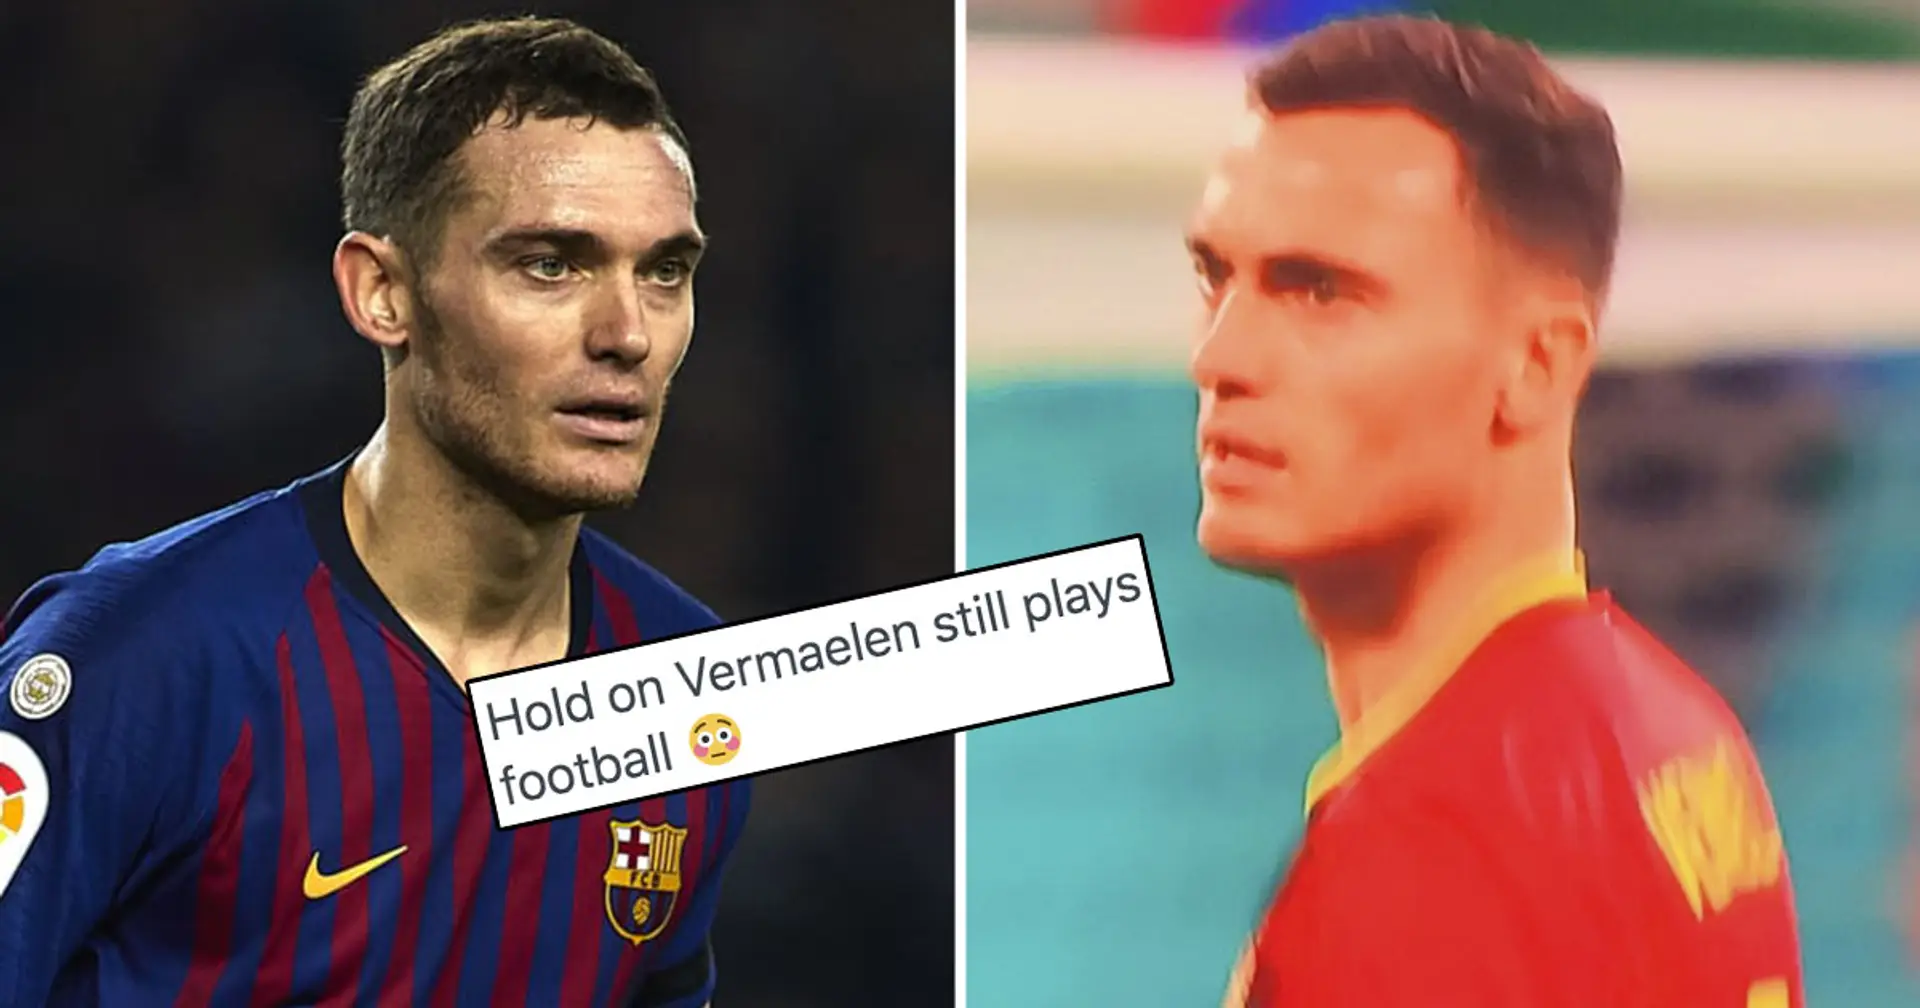 'Is he still alive?': 35-year-old Vermaelen makes surprising Euro 2020 appearance